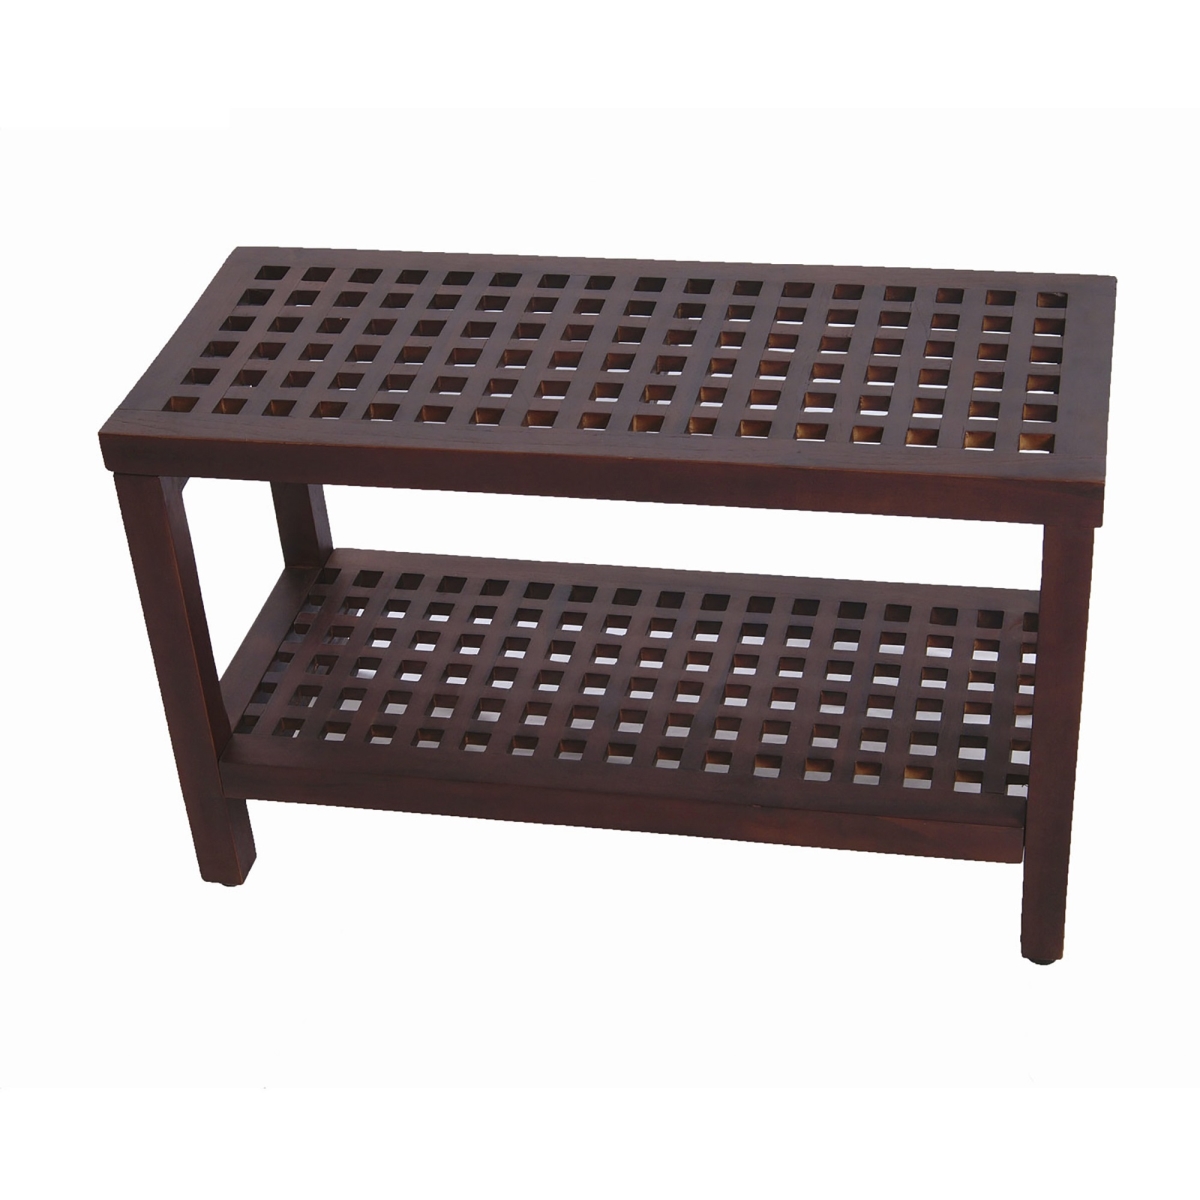 Picture of HomeRoots 376683 Lattice Teak Shower Bench with Shelf in Brown